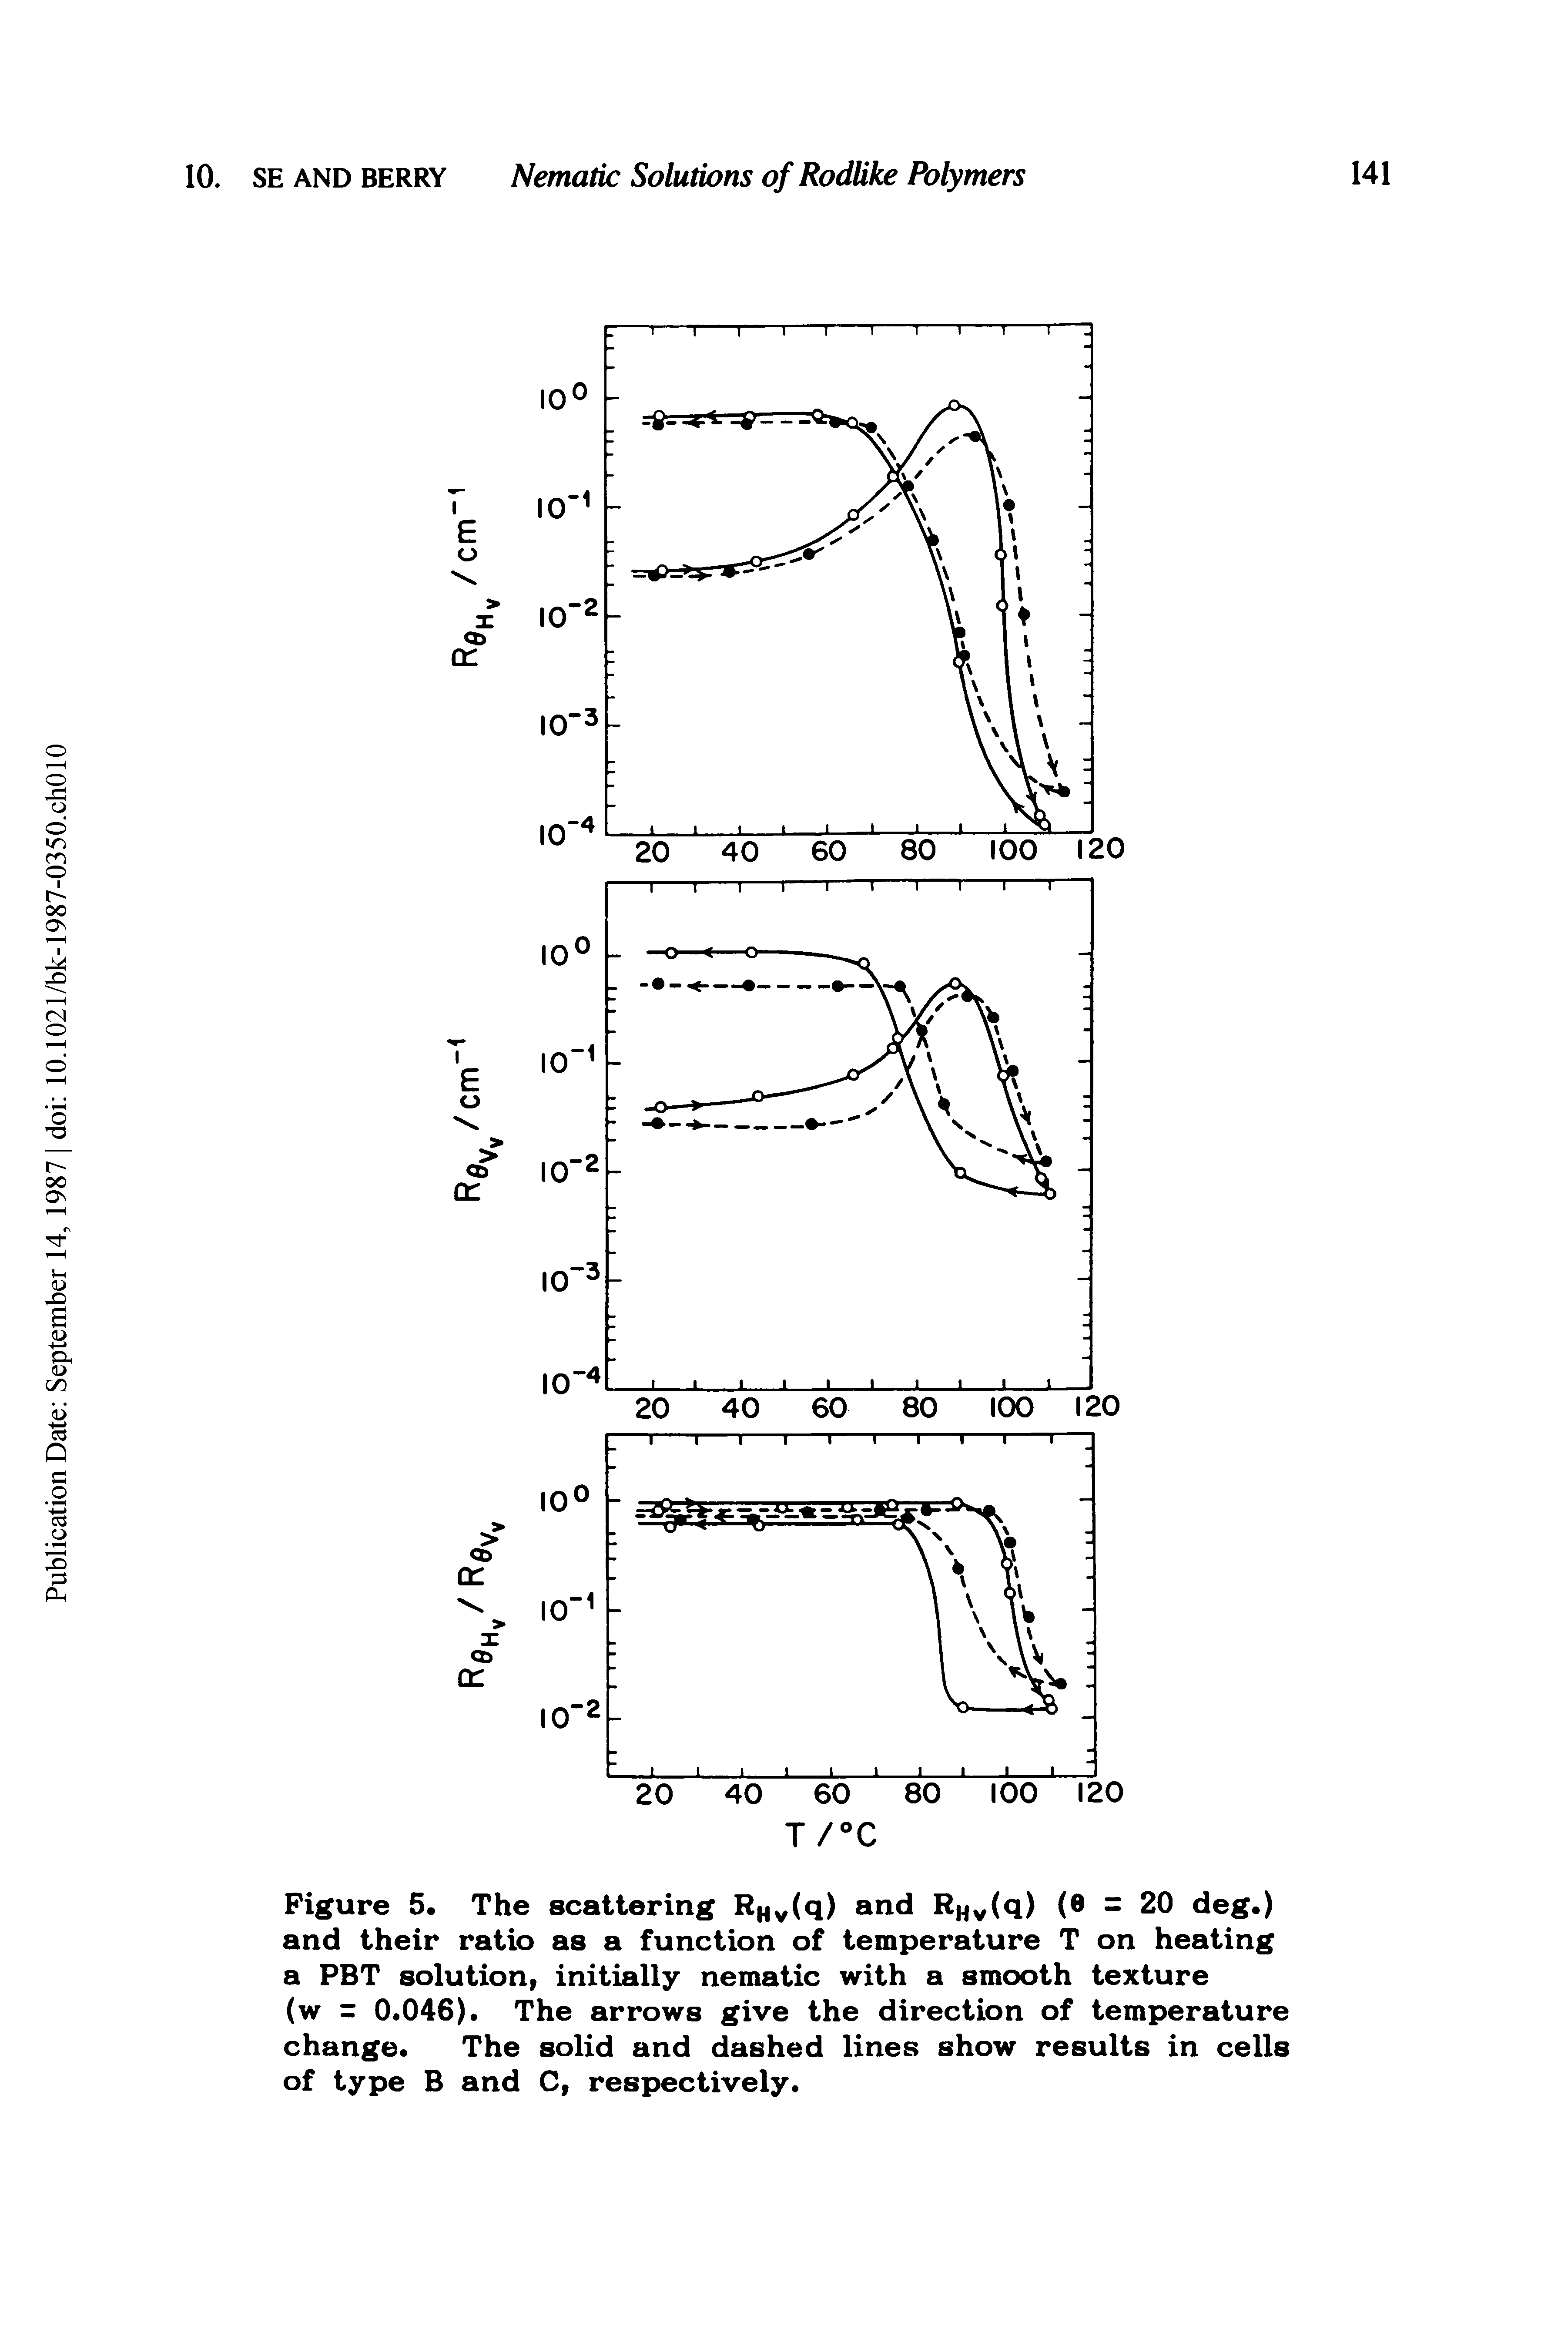 Figure 5. The scattering RHv(q) and Rhv(q) ( = 20 deg.) and their ratio as a function of temperature T on heating a PBT solution, initially nematic with a smooth texture (w = 0.046). The arrows give the direction of temperature change. The solid and dashed lines show results in cells of type B and C, respectively.